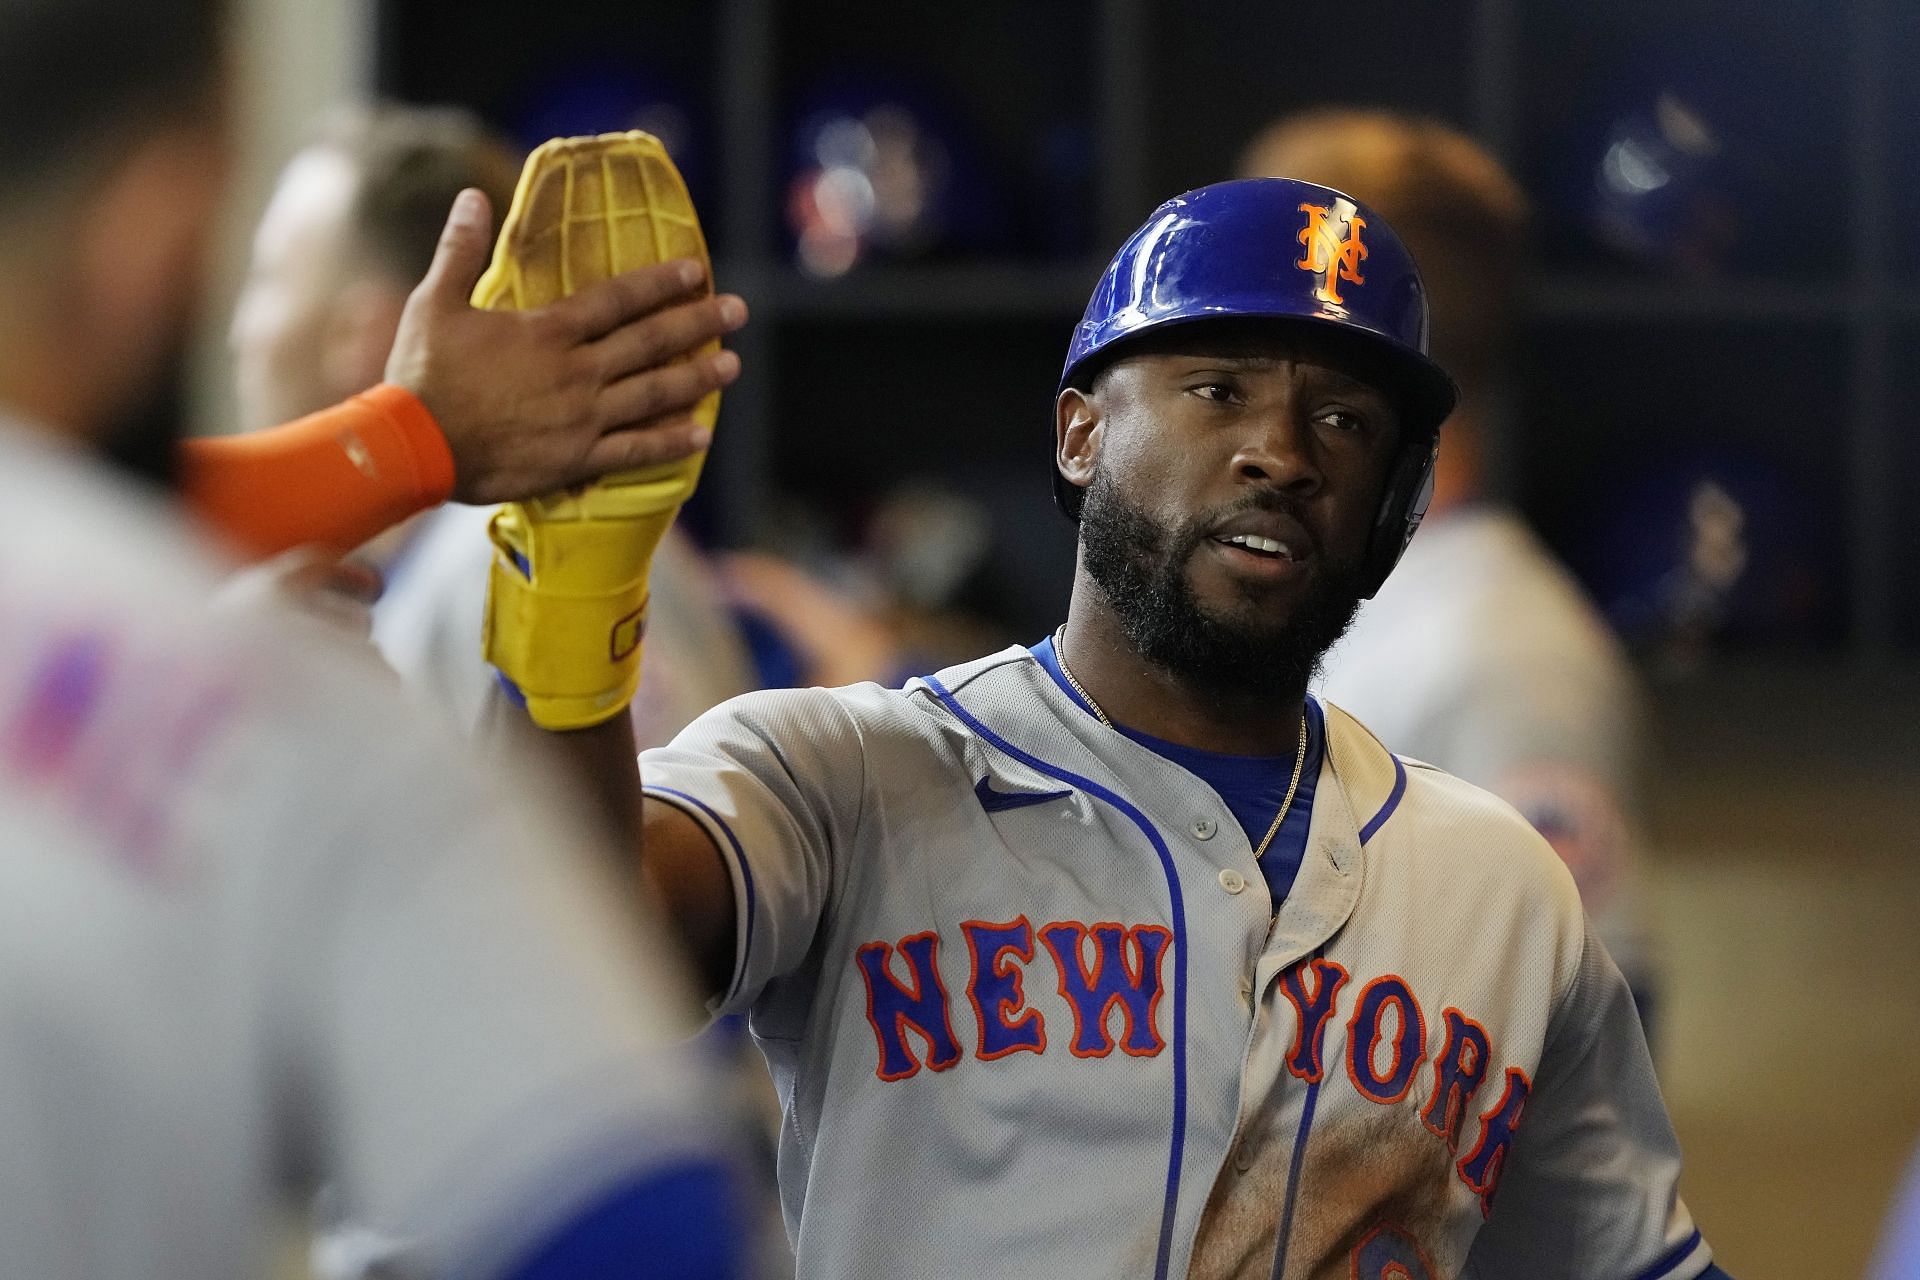 Starling Marte of the New York Mets celebrates in the dugout after scoring a run.